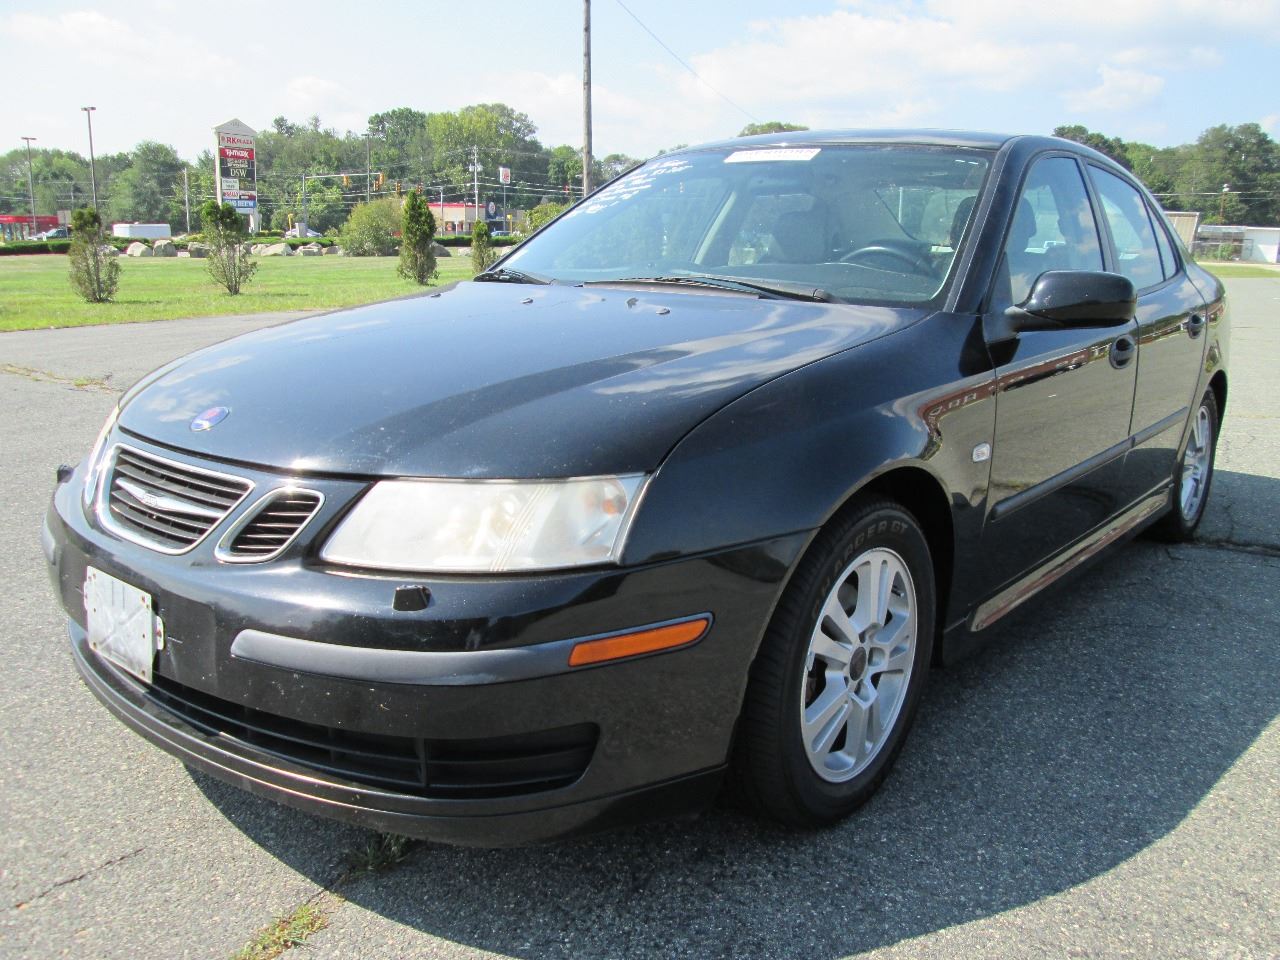 2006 Saab 9-3 for sale at Kostyas Auto Sales Inc in Swansea MA